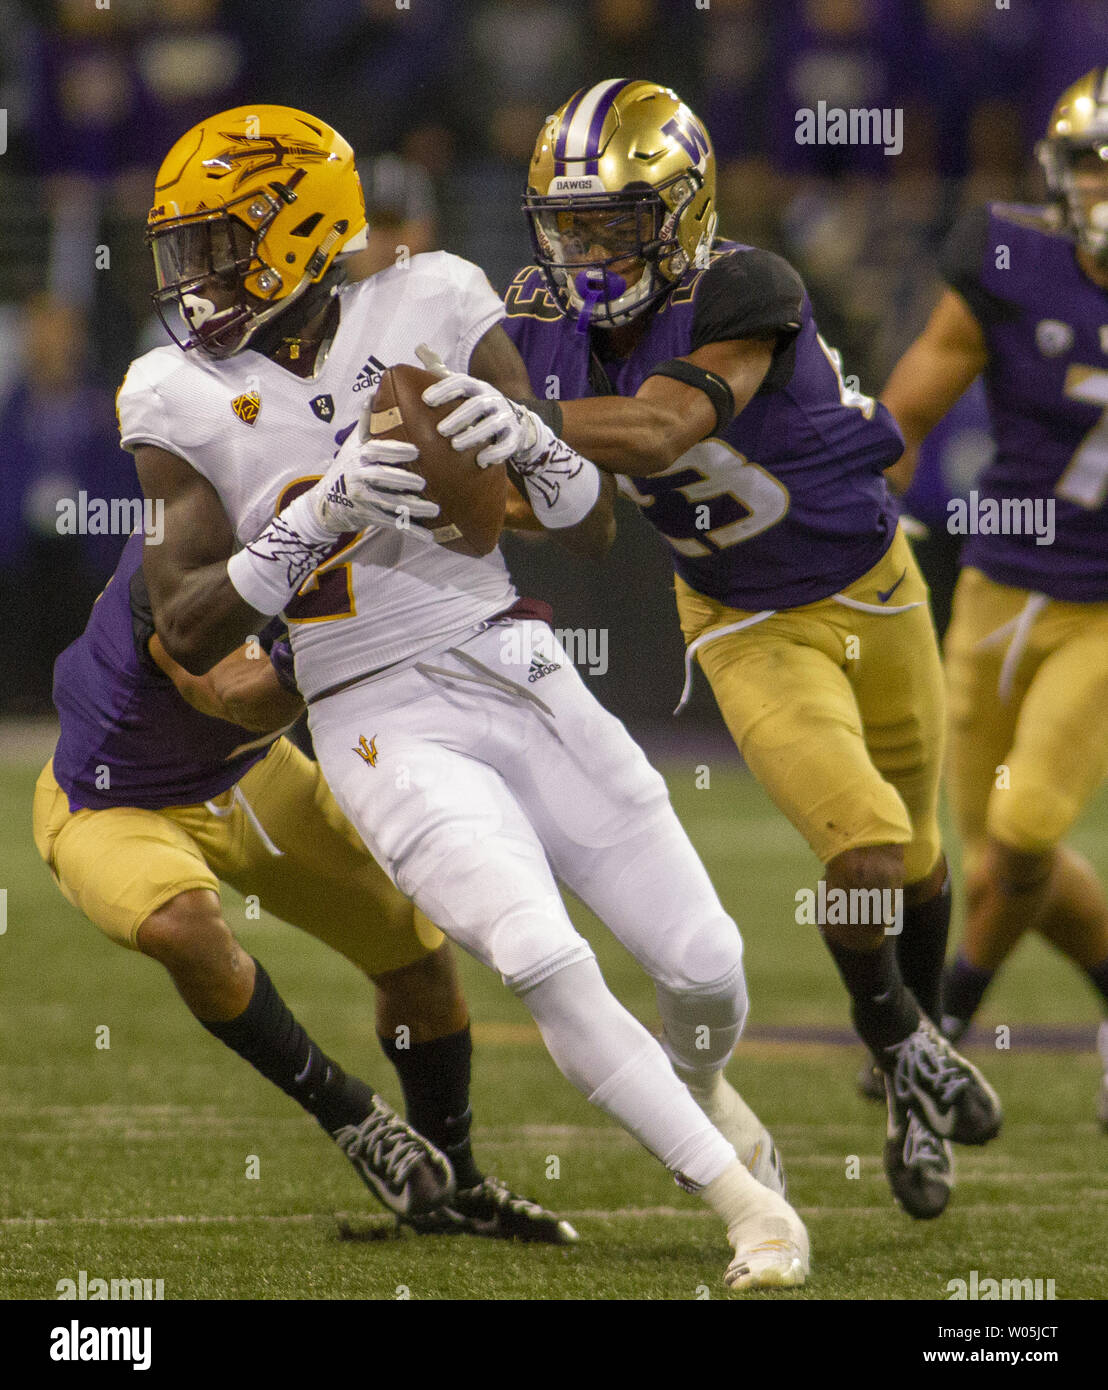 Arizona State Sun Devils wide receiver Brandon Aiyuk (2) tries to break away  from Washington Huskies defensive back Jordan Miller (23) during the second  quarter in a PAC-12 College Football game on